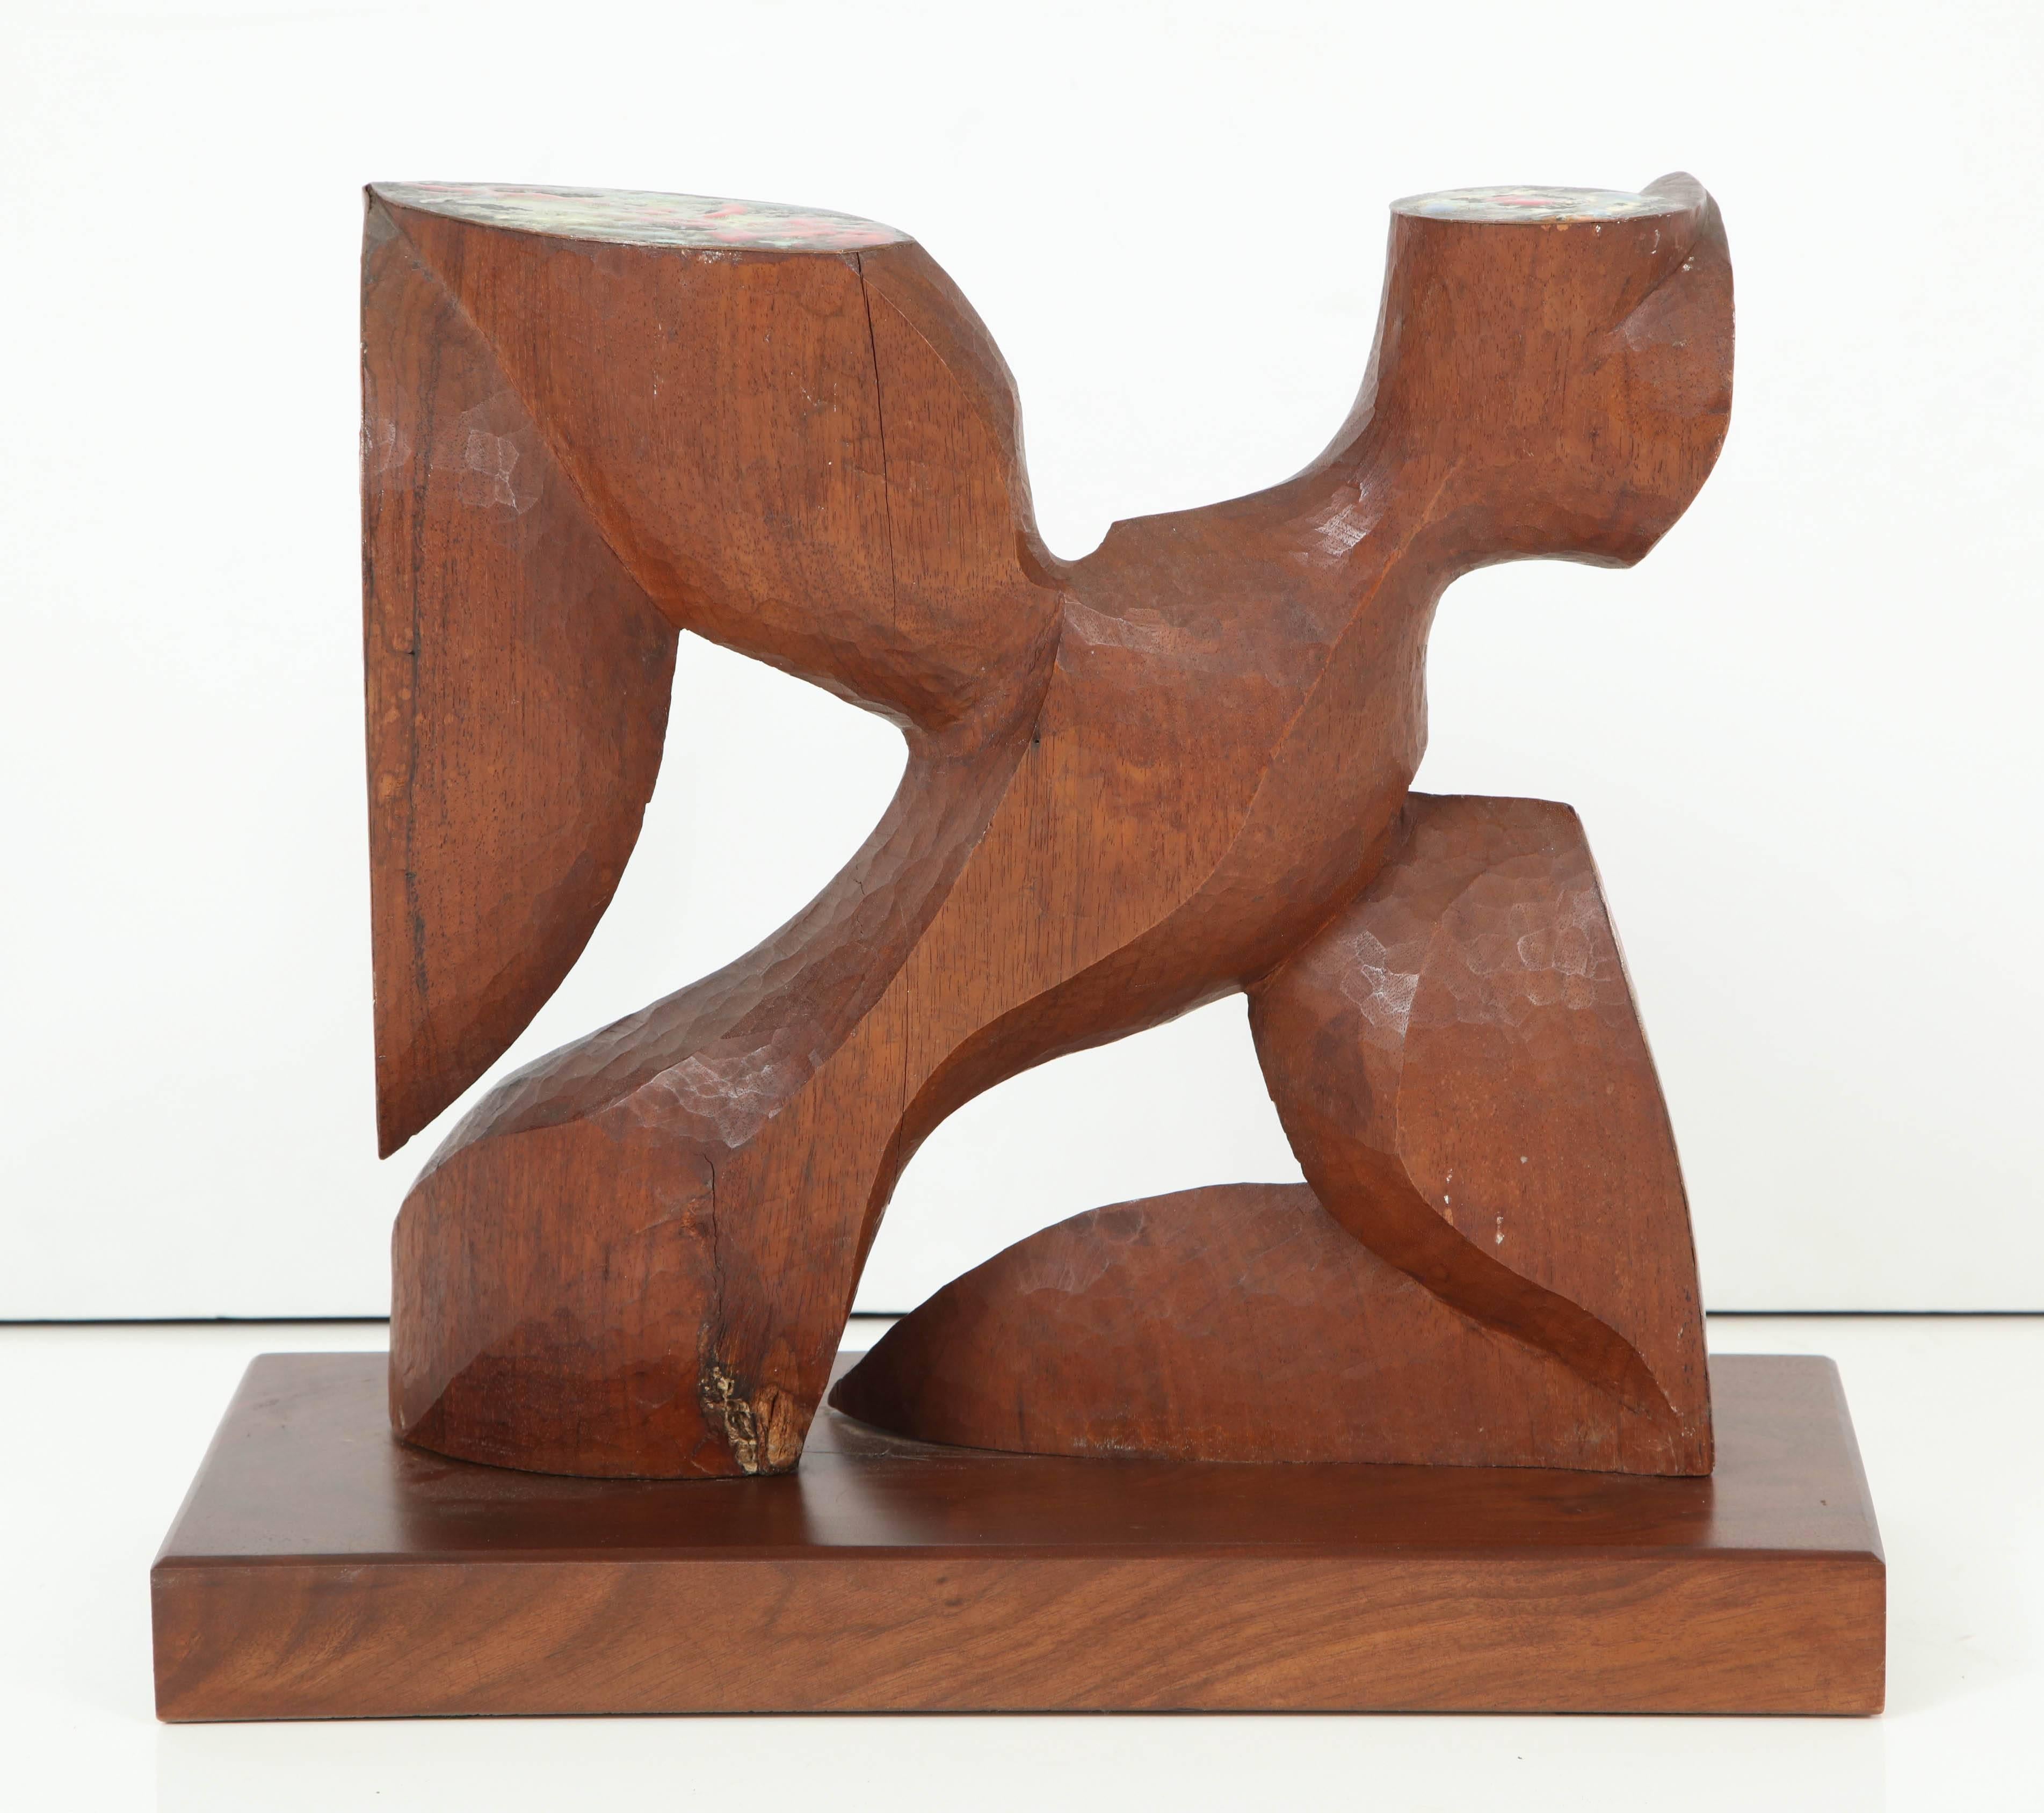 Abstract carved walnut tabletop sculpture with enamelled copper appliqués mounted on walnut base. Attributed to Frank Kyle (USA/Mexico 1914-1992).